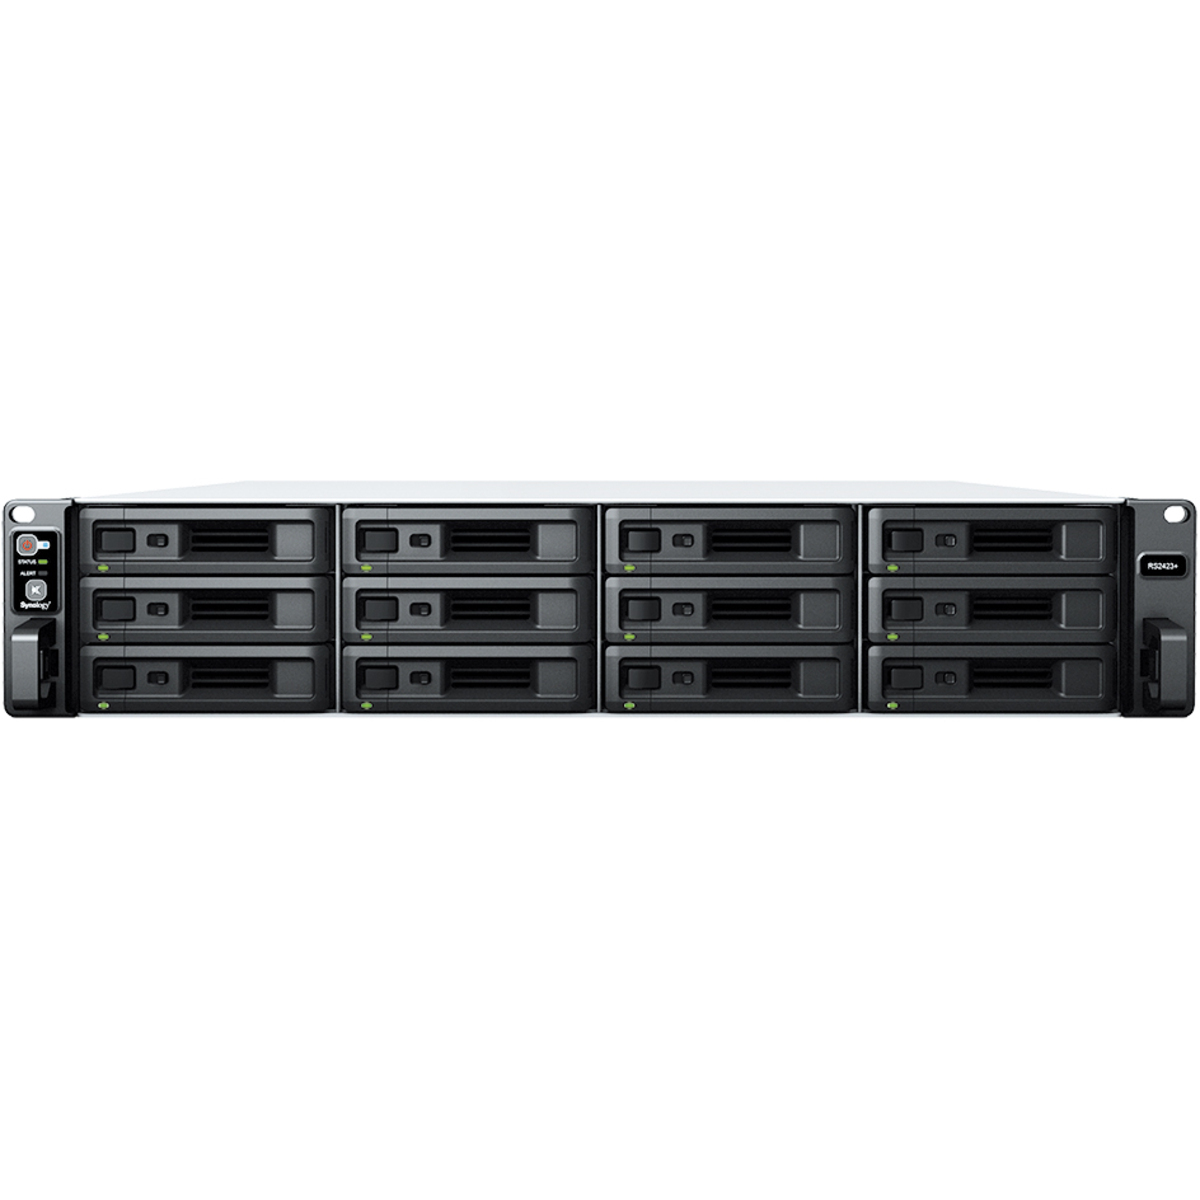 Synology RackStation RS2423RP+ 32tb 12-Bay RackMount Multimedia / Power User / Business NAS - Network Attached Storage Device 8x4tb Western Digital Ultrastar DC HC310 HUS726T4TALE6L4 3.5 7200rpm SATA 6Gb/s HDD ENTERPRISE Class Drives Installed - Burn-In Tested - FREE RAM UPGRADE RackStation RS2423RP+